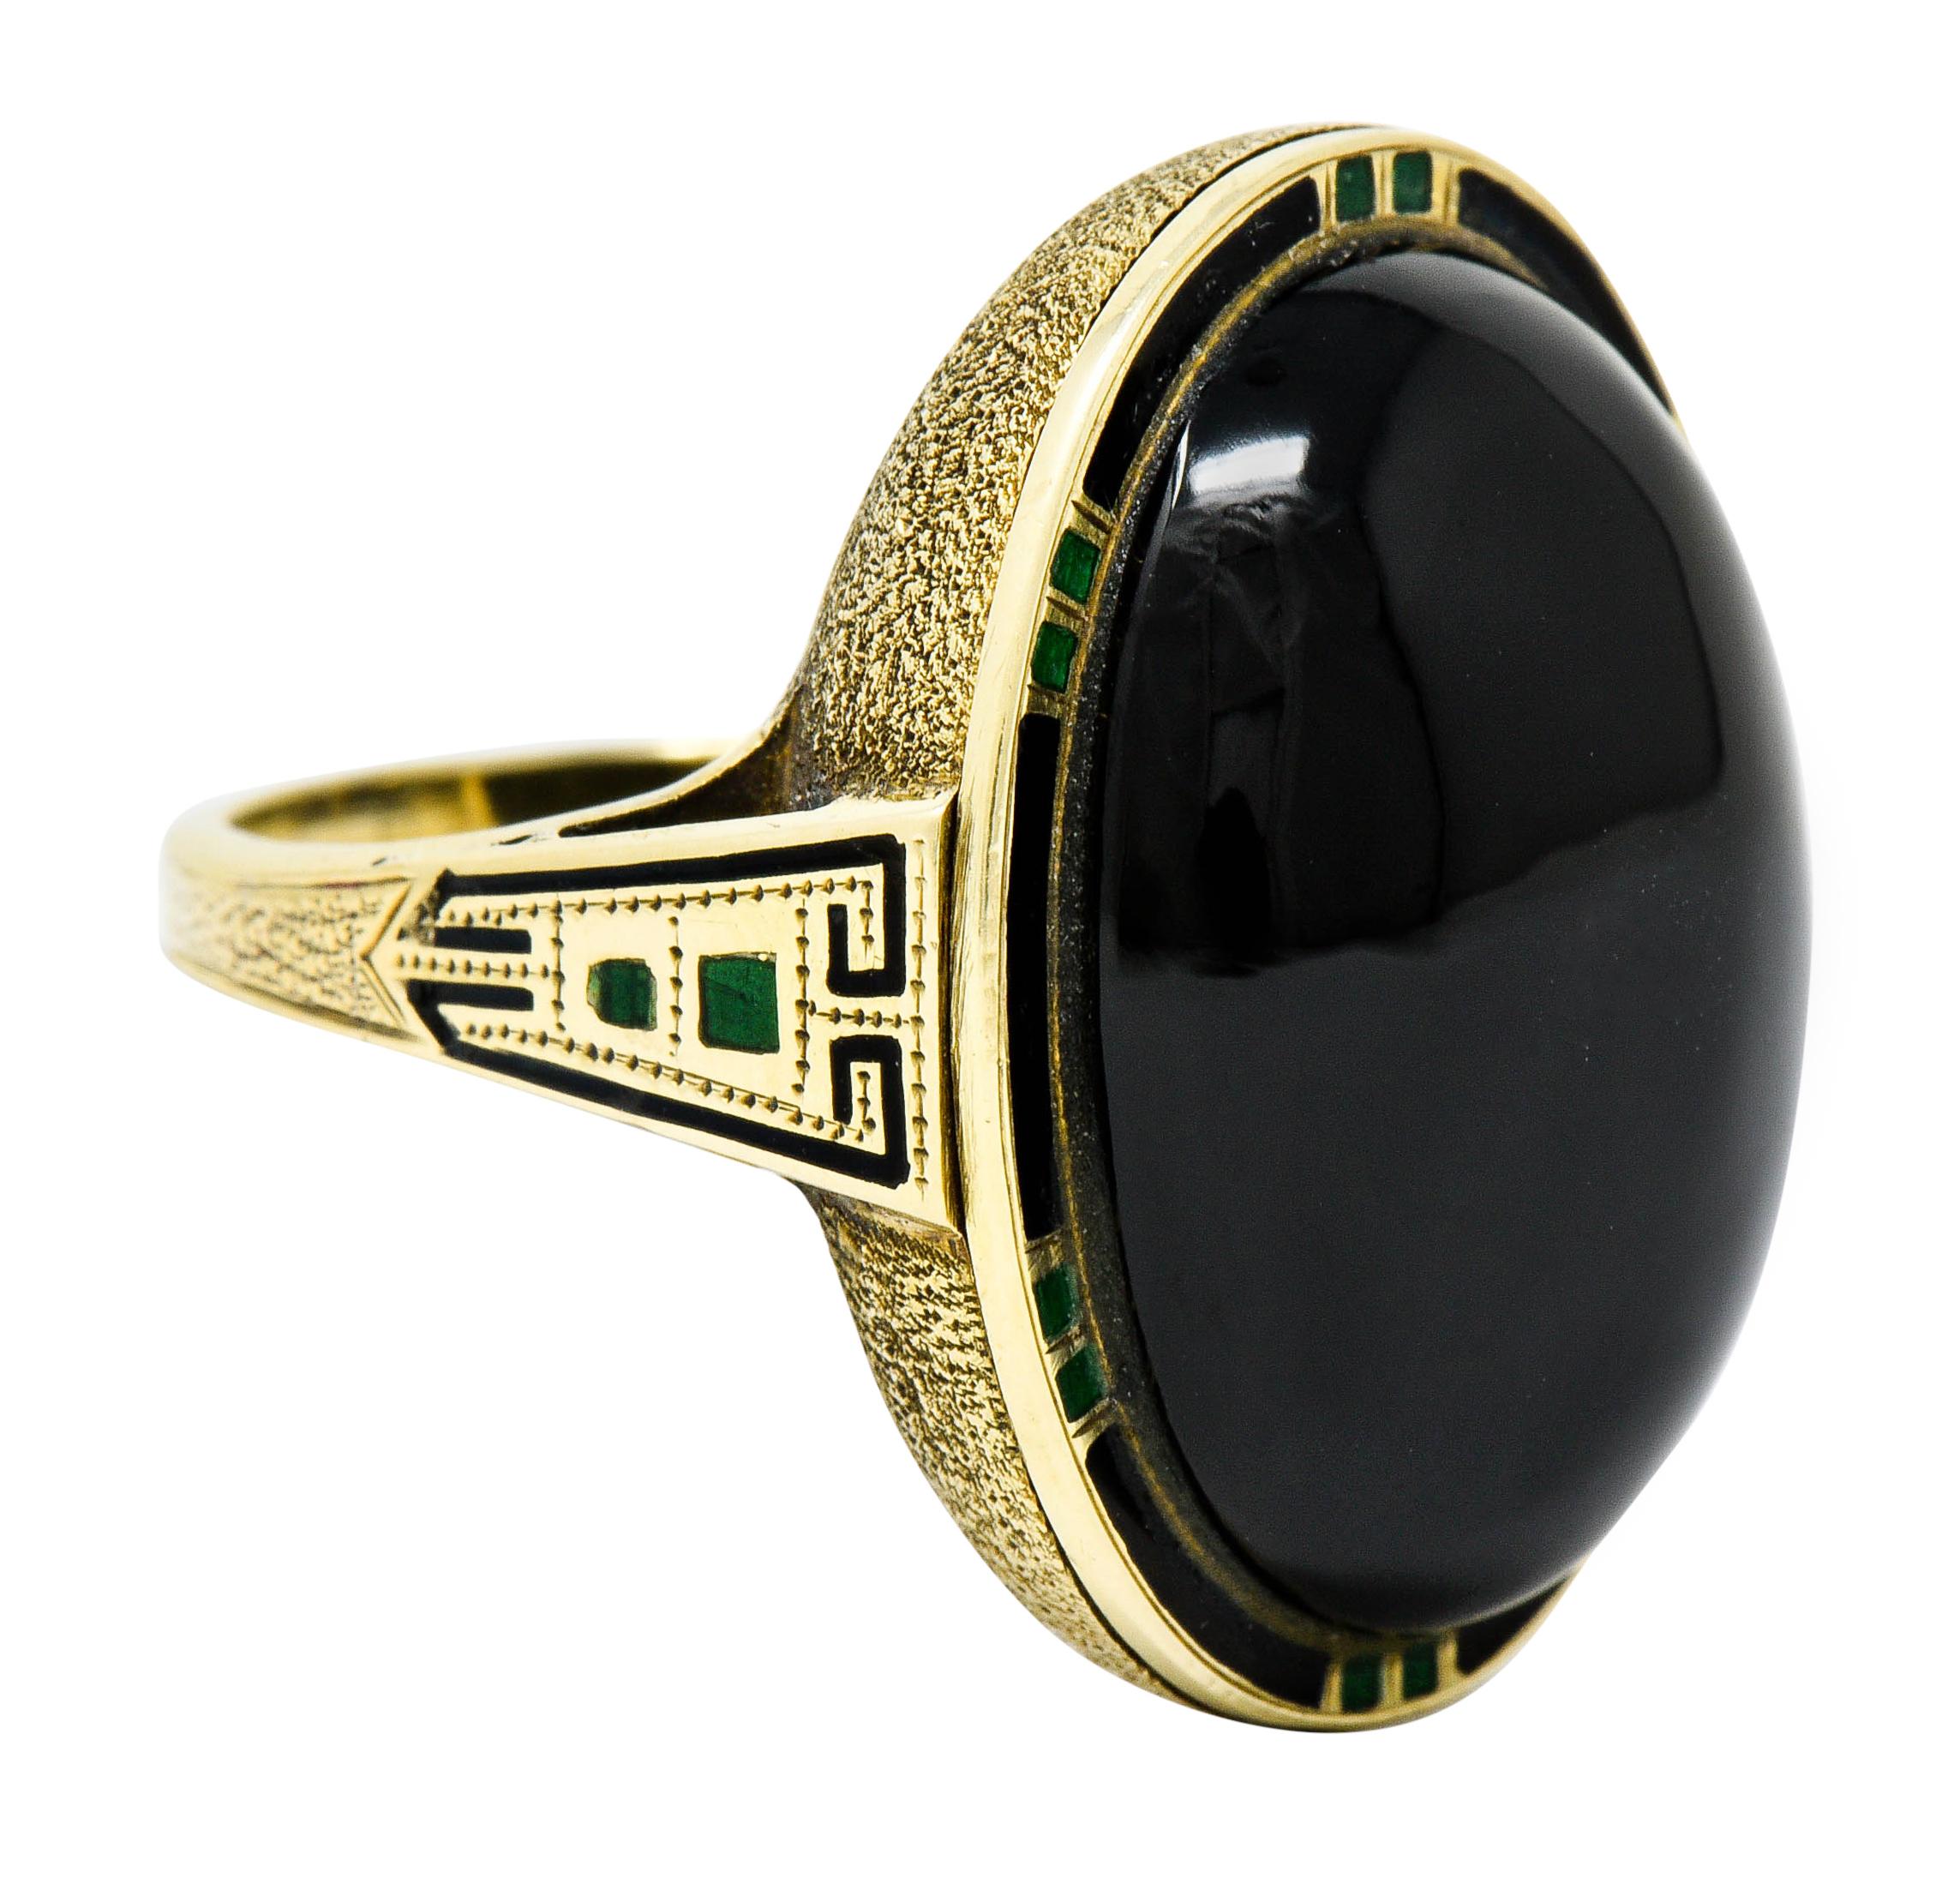 Centering an oval onyx cabochon measuring approximately 21.7 x 16.4 mm

Surrounded by a delicate black enamel halo with green dash accents

Mounting features a stippled texture while shoulders feature a Greek key motif

Enamel is excellent overall